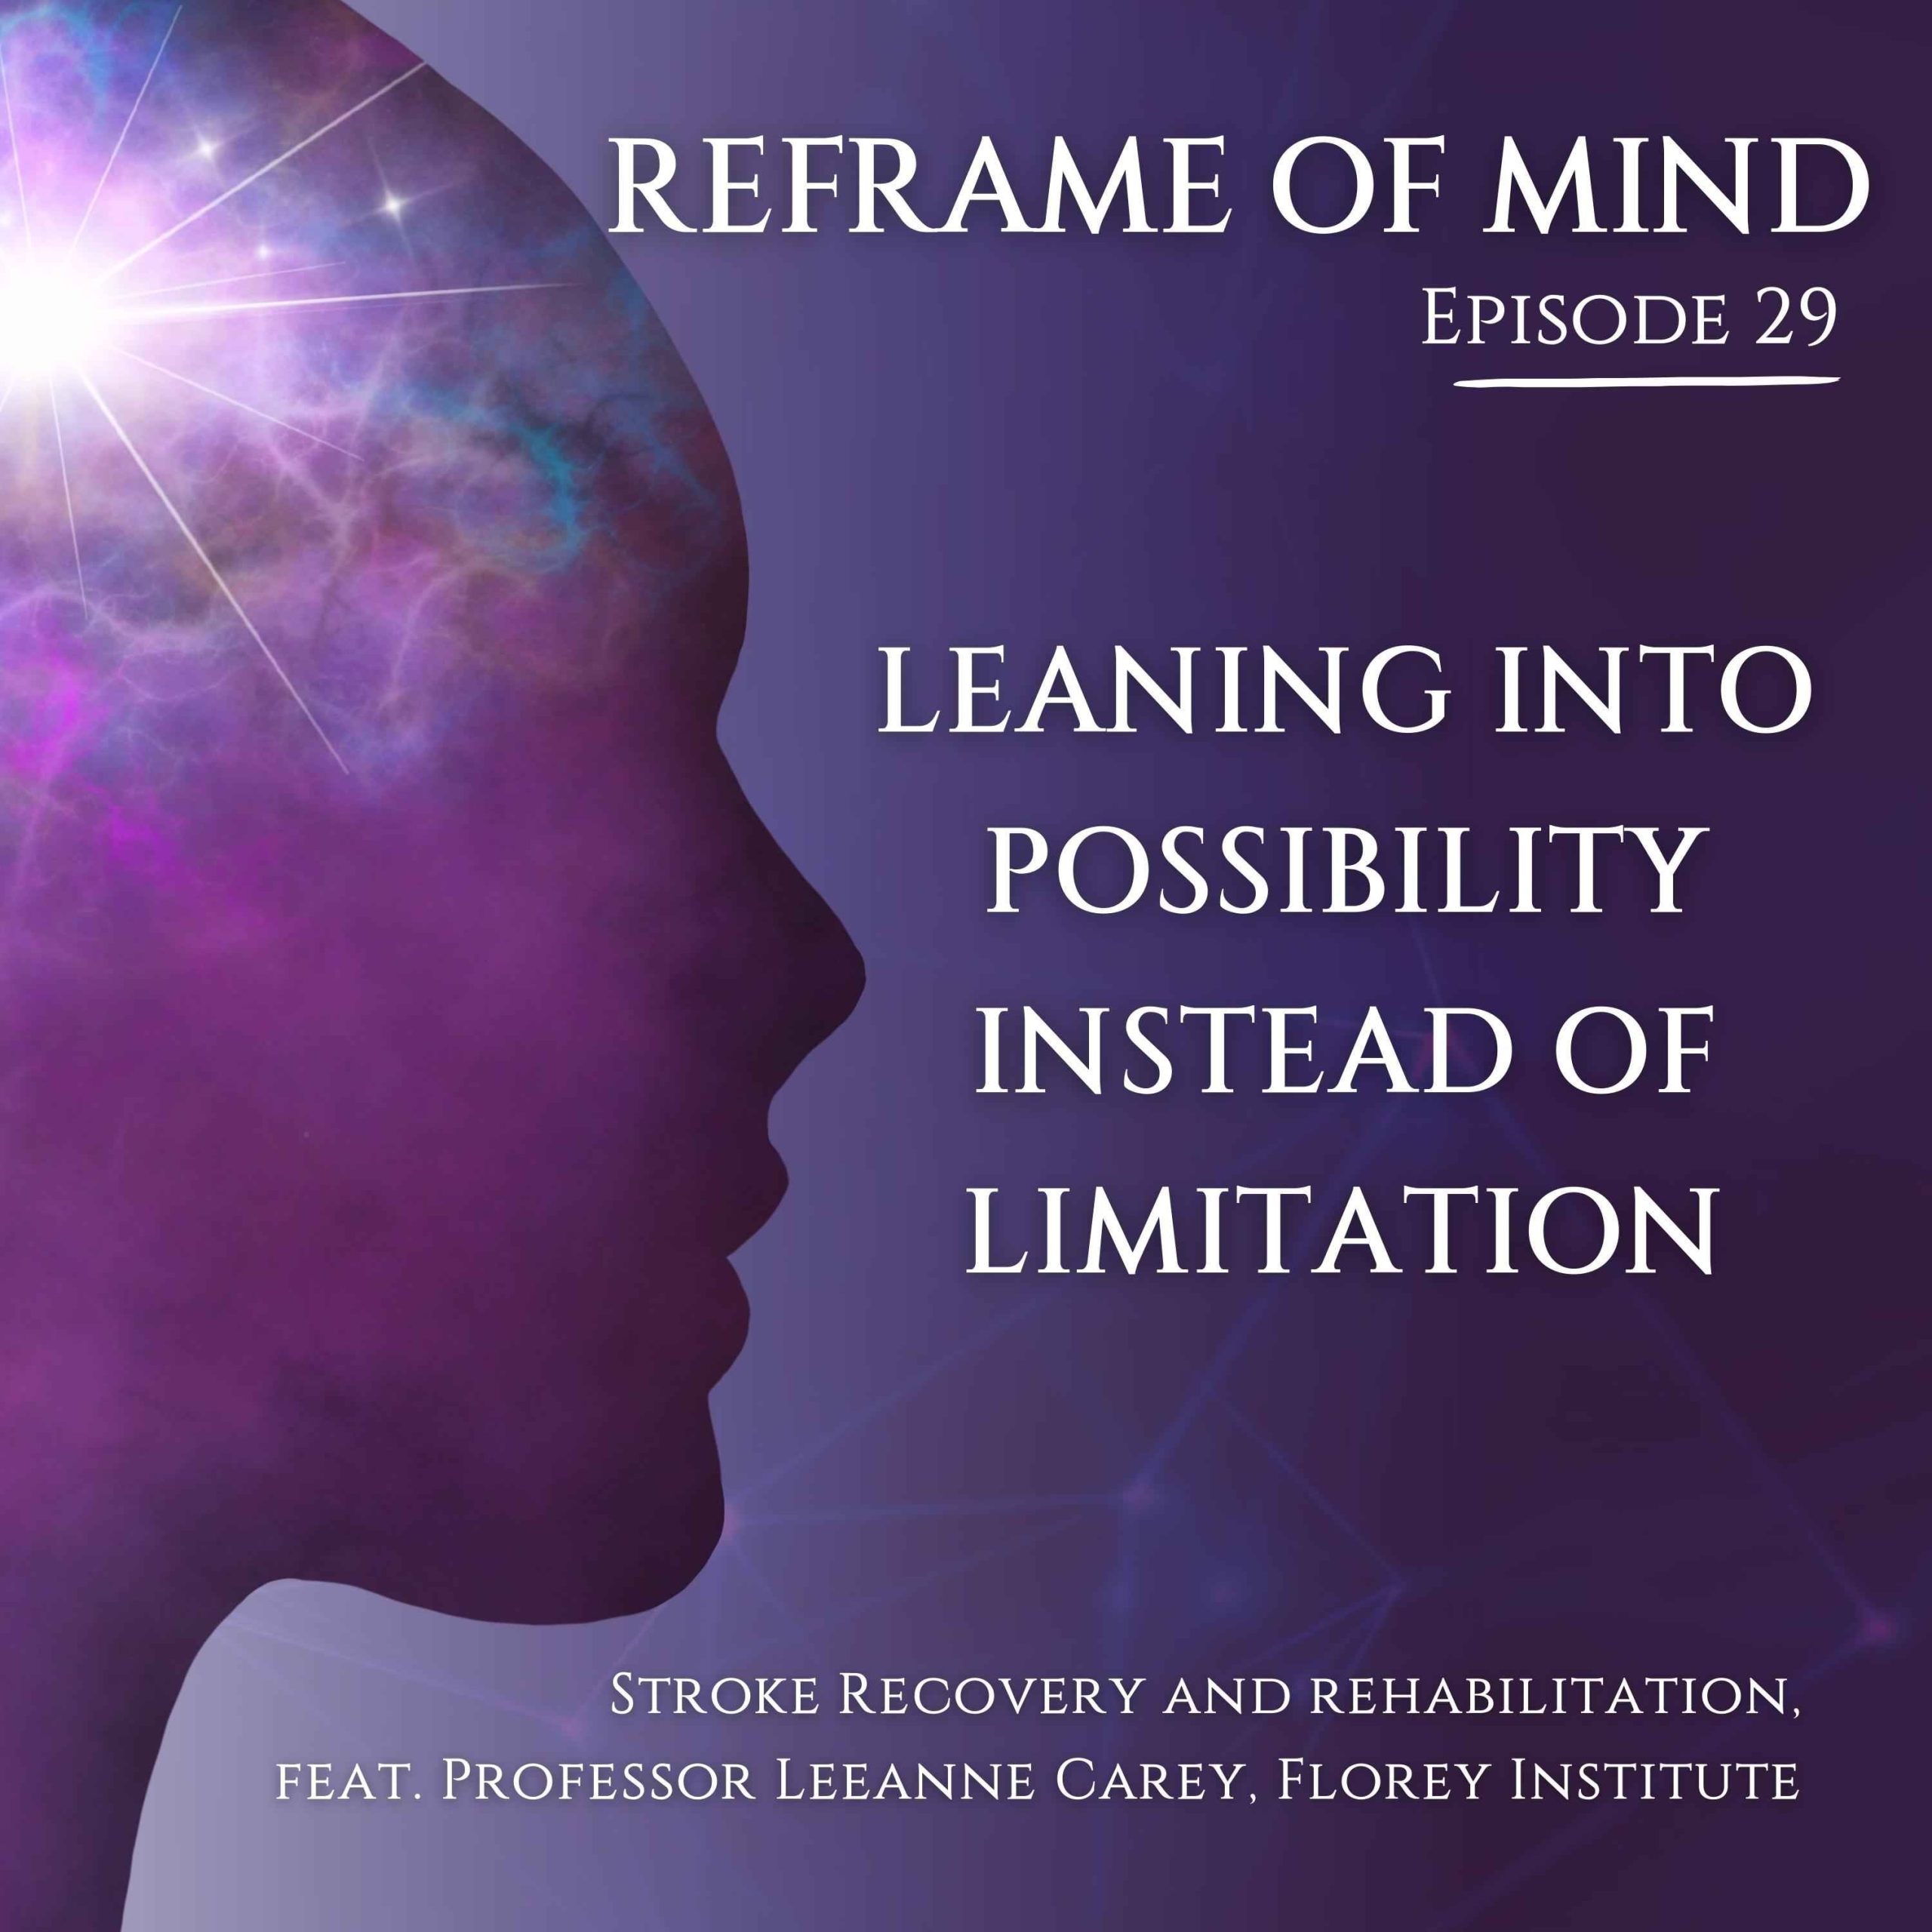 Leaning into possibility instead of limitation